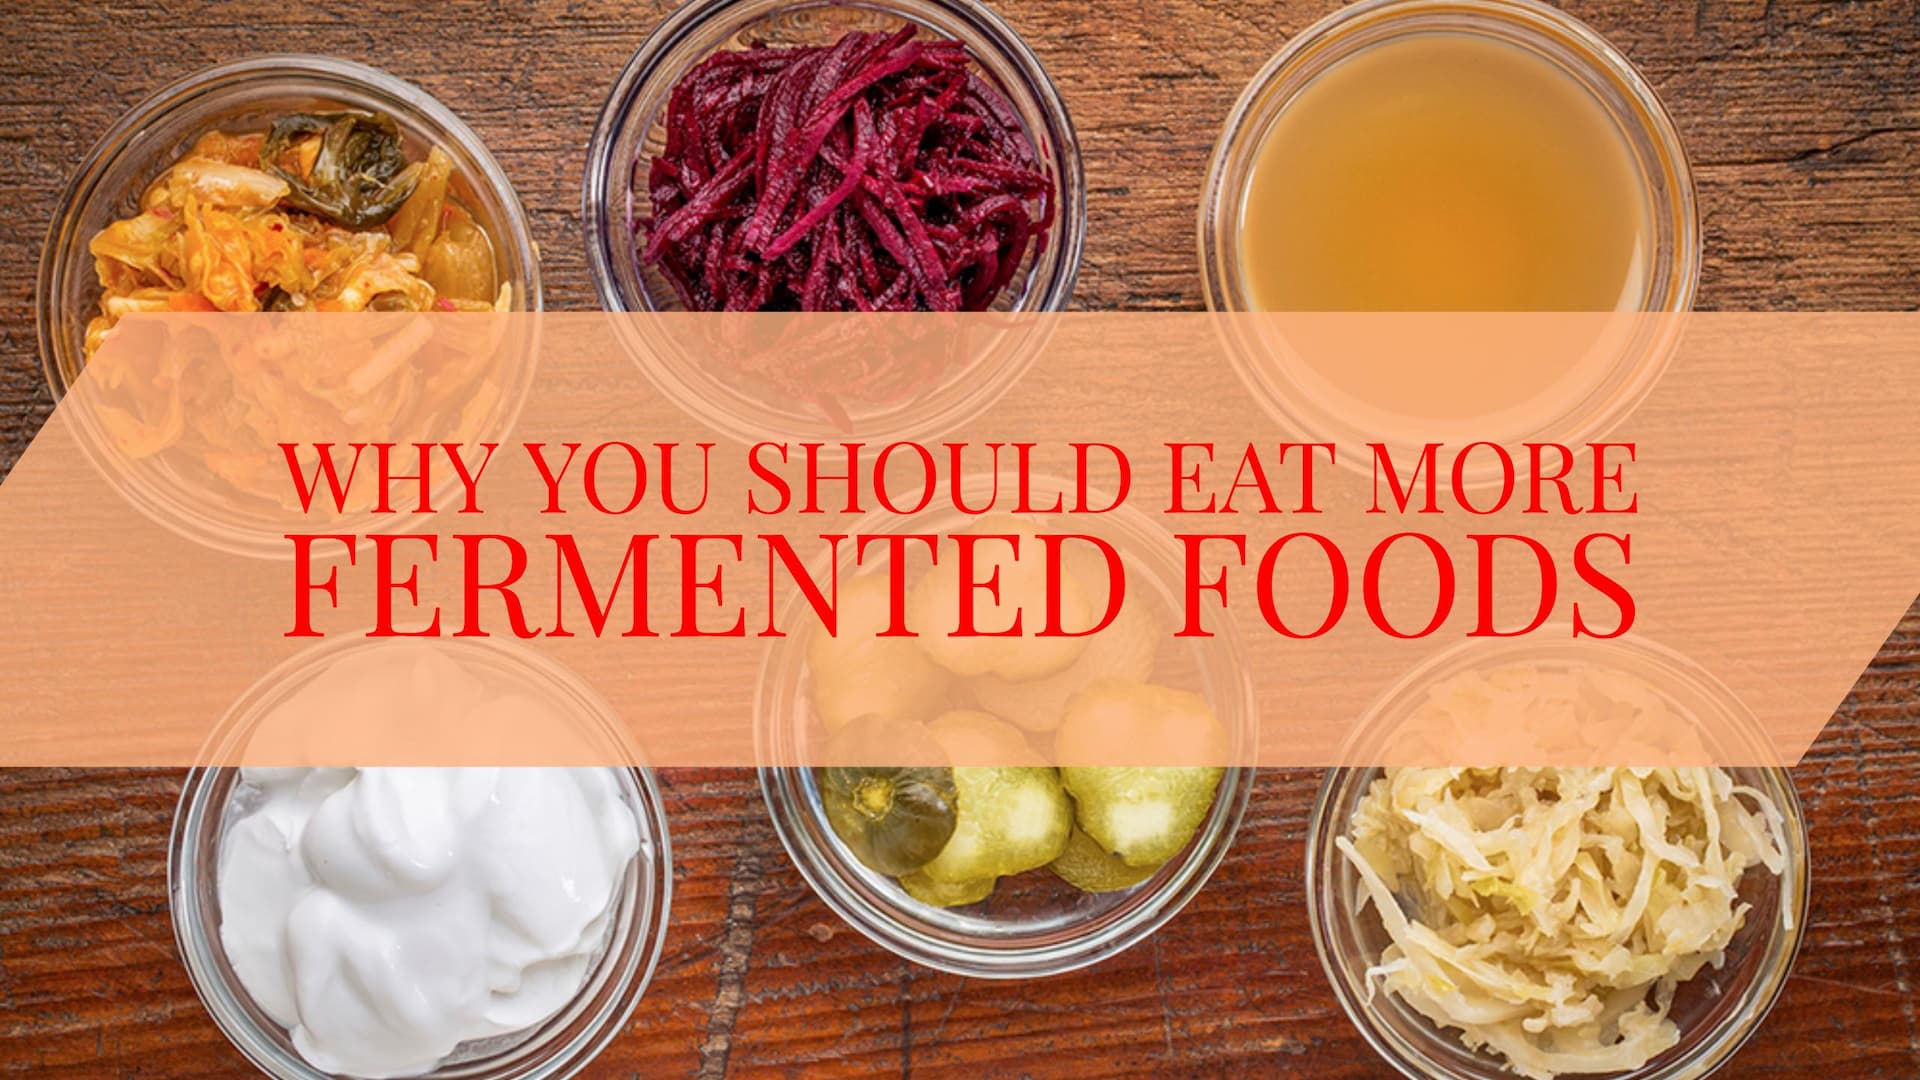 Why You Should Eat More Fermented Foods